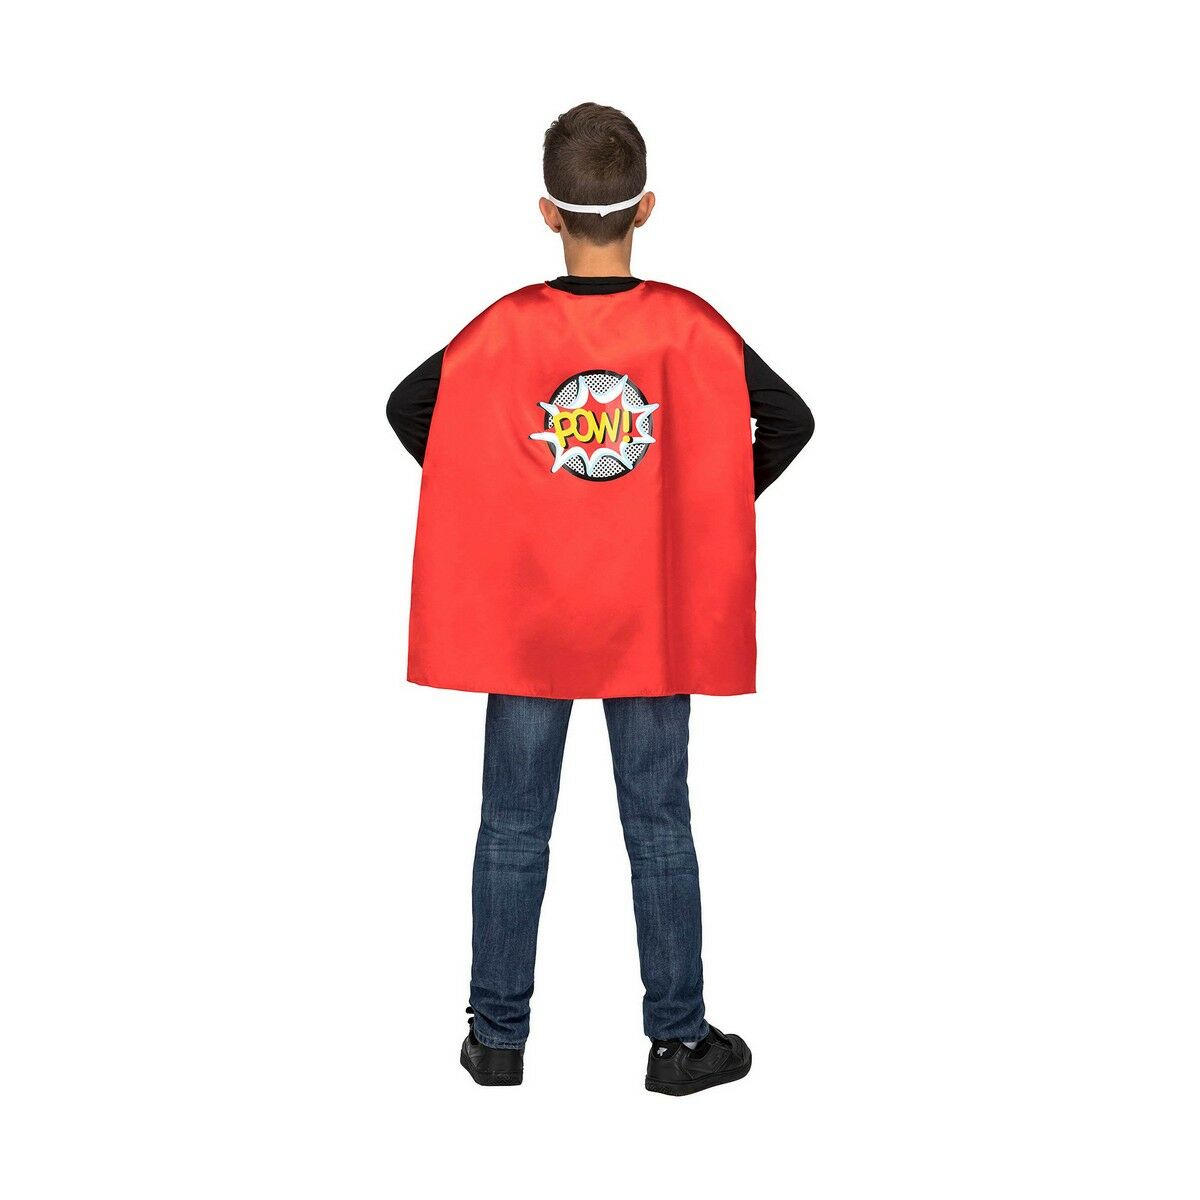 Costume for Children My Other Me Red Superhero 3-6 years (2 Pieces)